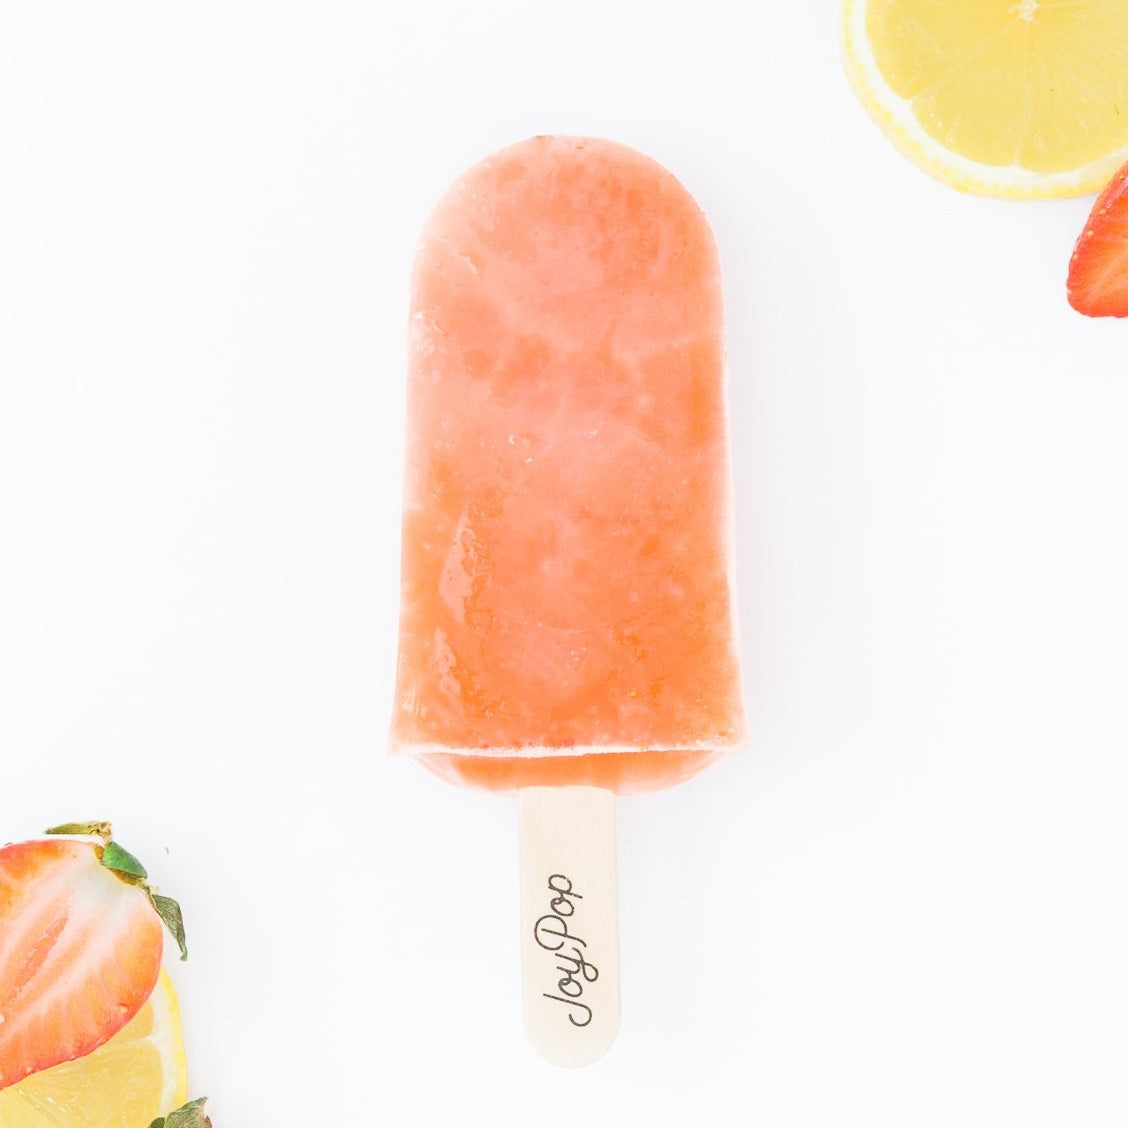 Strawberry Lemonade frozen pop from The Joy Pop Co with fresh strawberries and lemon slices on a white background